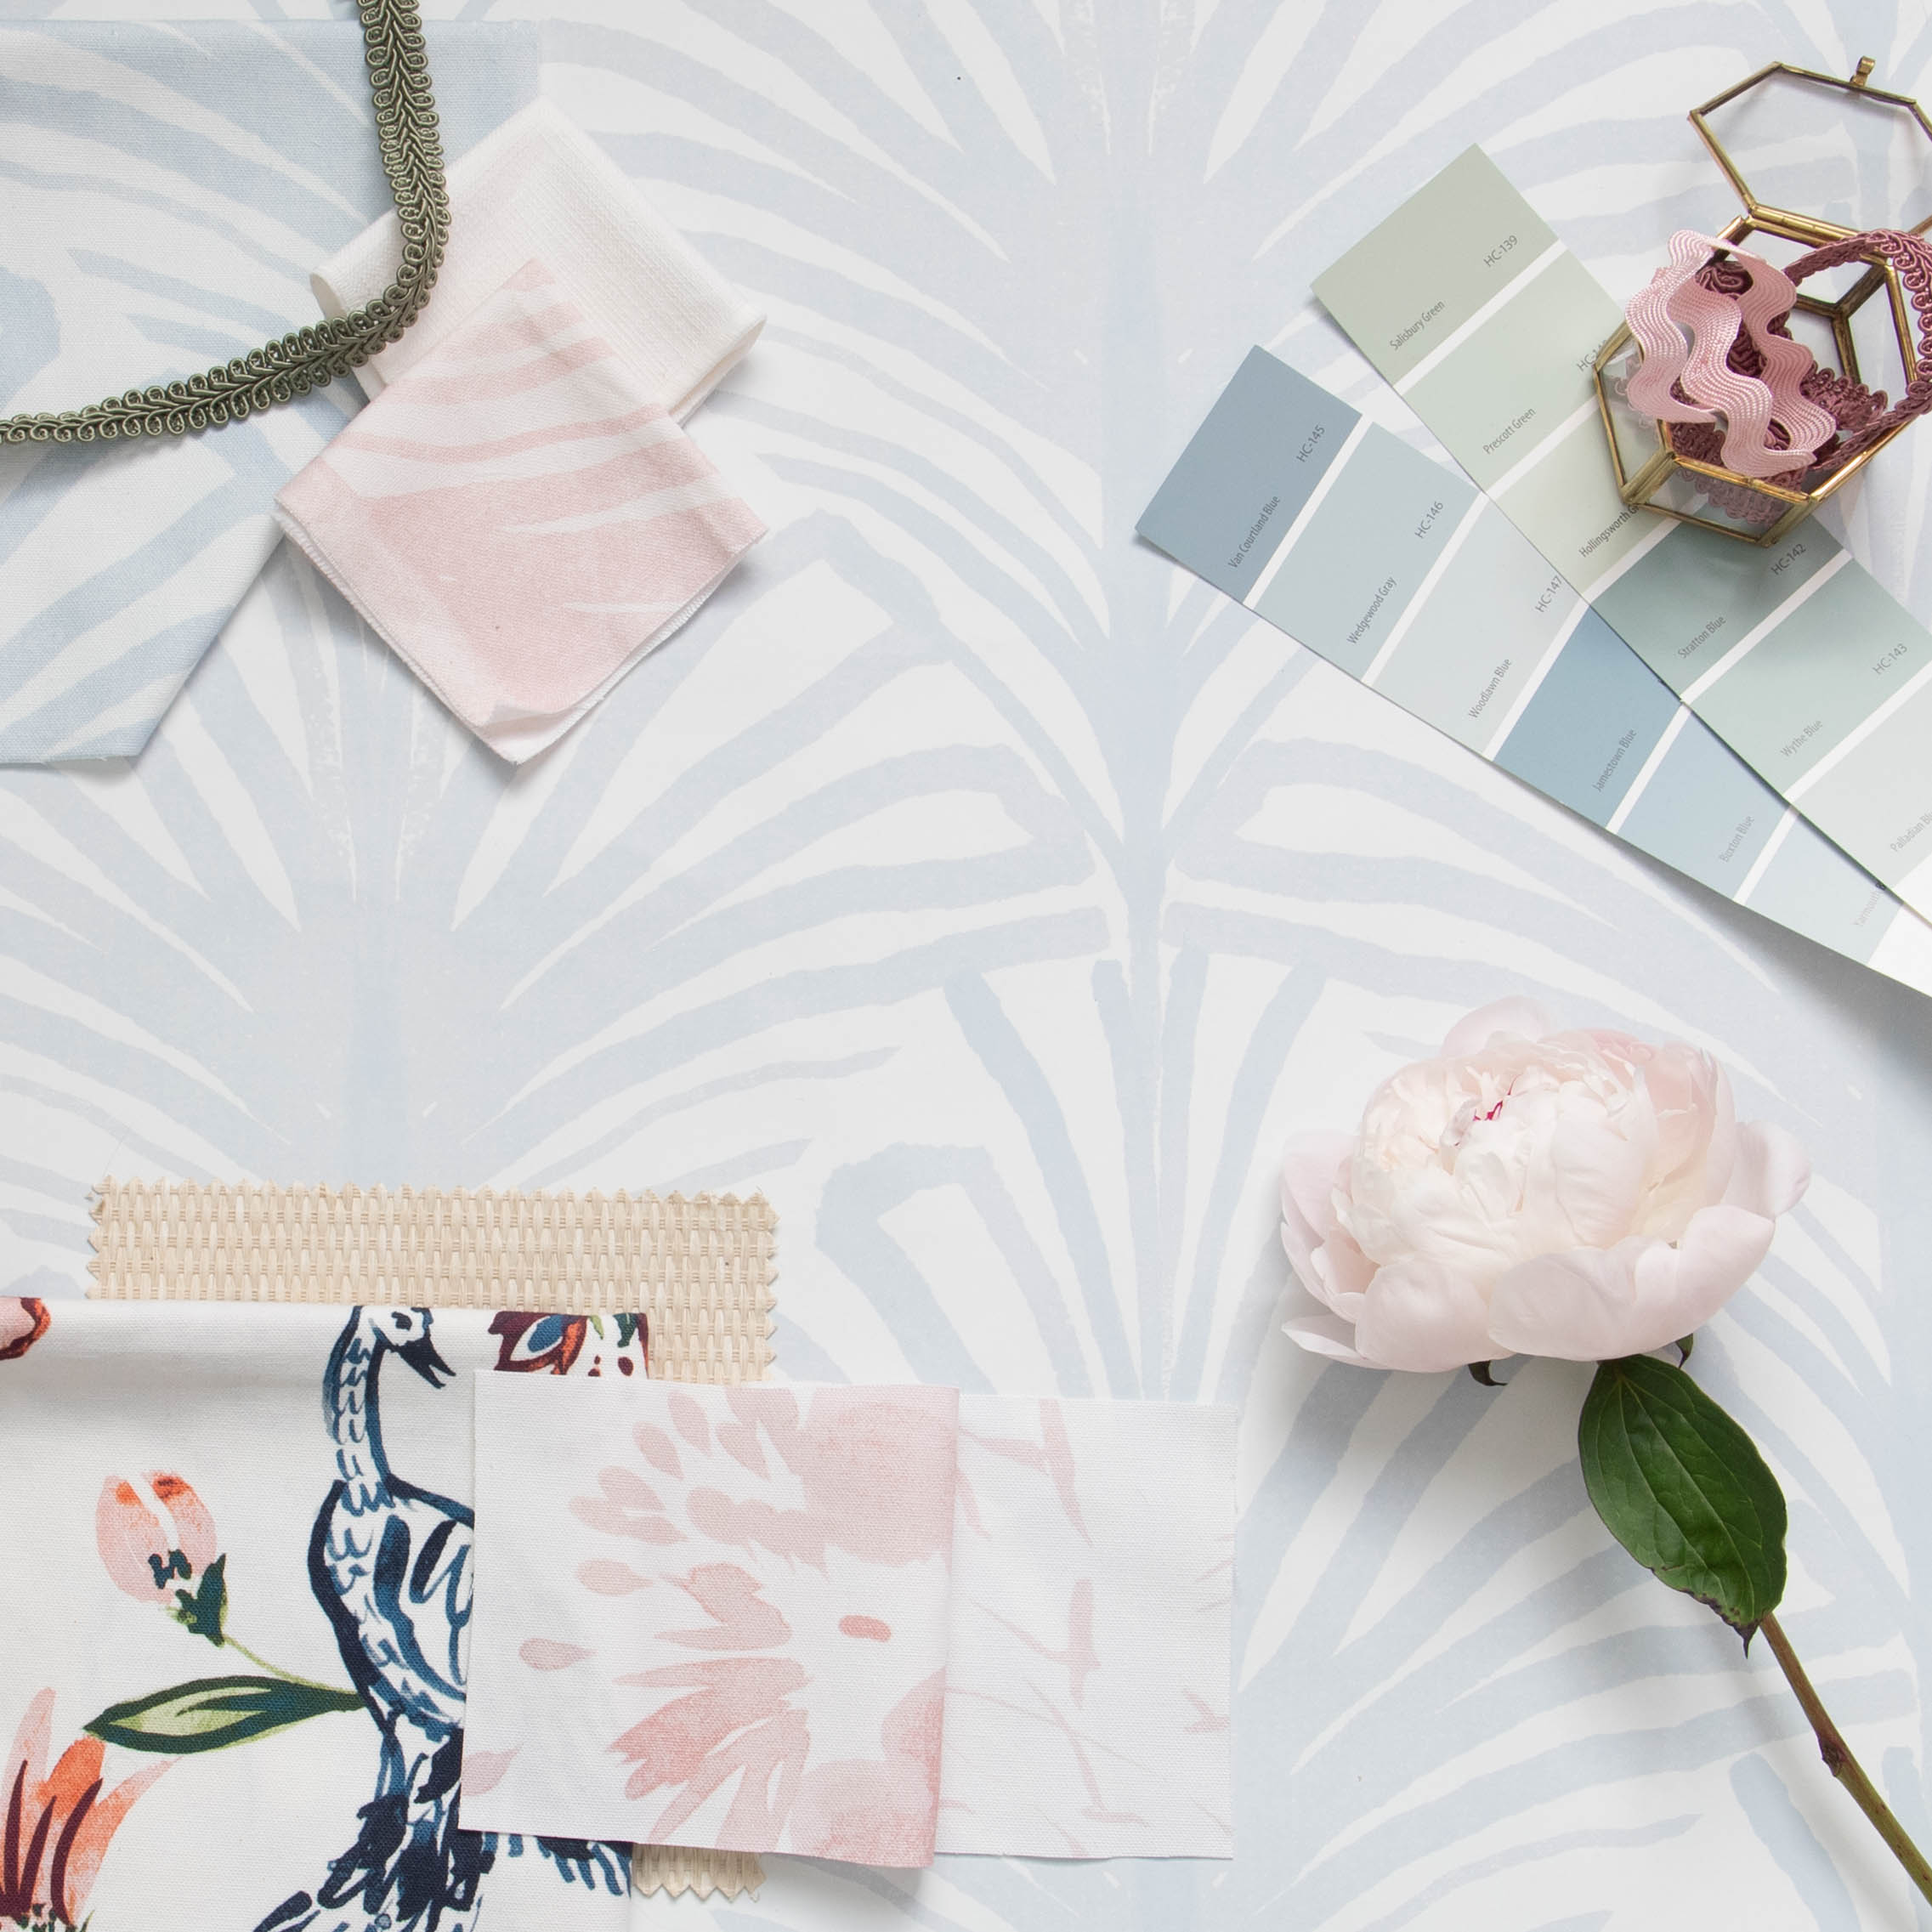 Interior design moodboard and fabric inspirations with Sky Blue Palm wallpaper, Sky Blue Palm printed cotton swatch, Rose Pink Palm printed cotton swatch, and Cream Chinoiserie cotton swatch